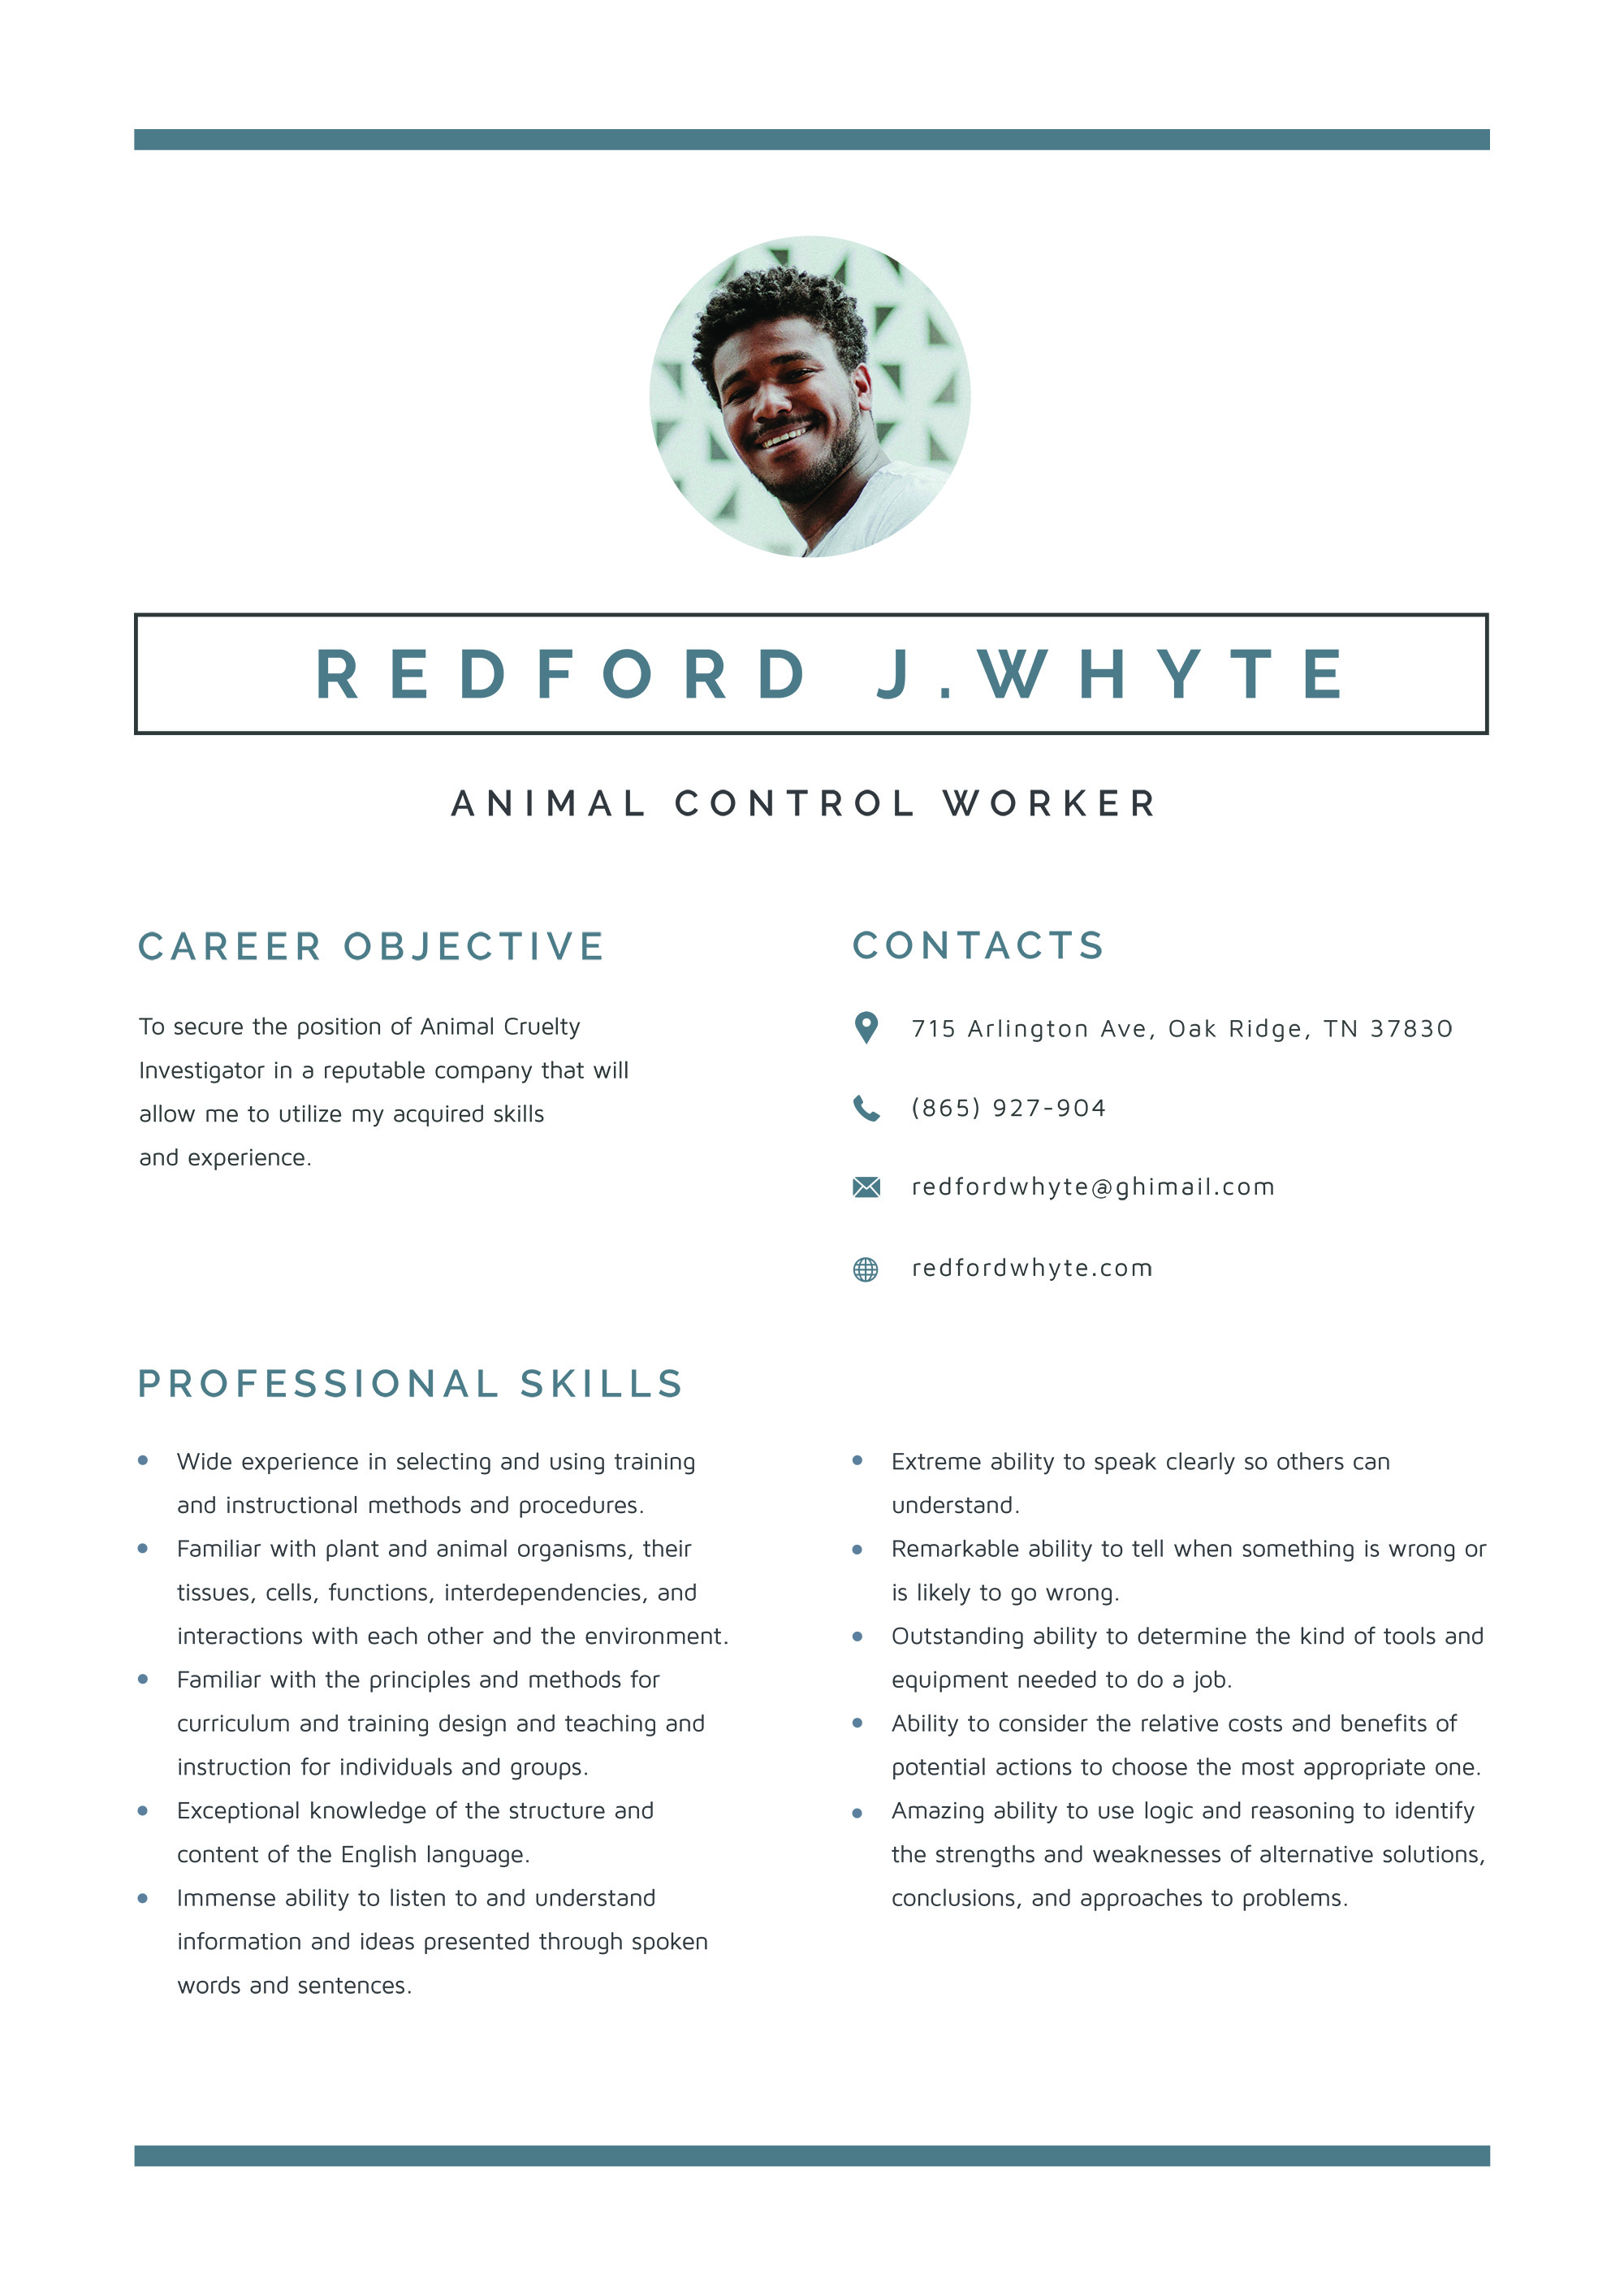 animal-control-worker-resume-page-1